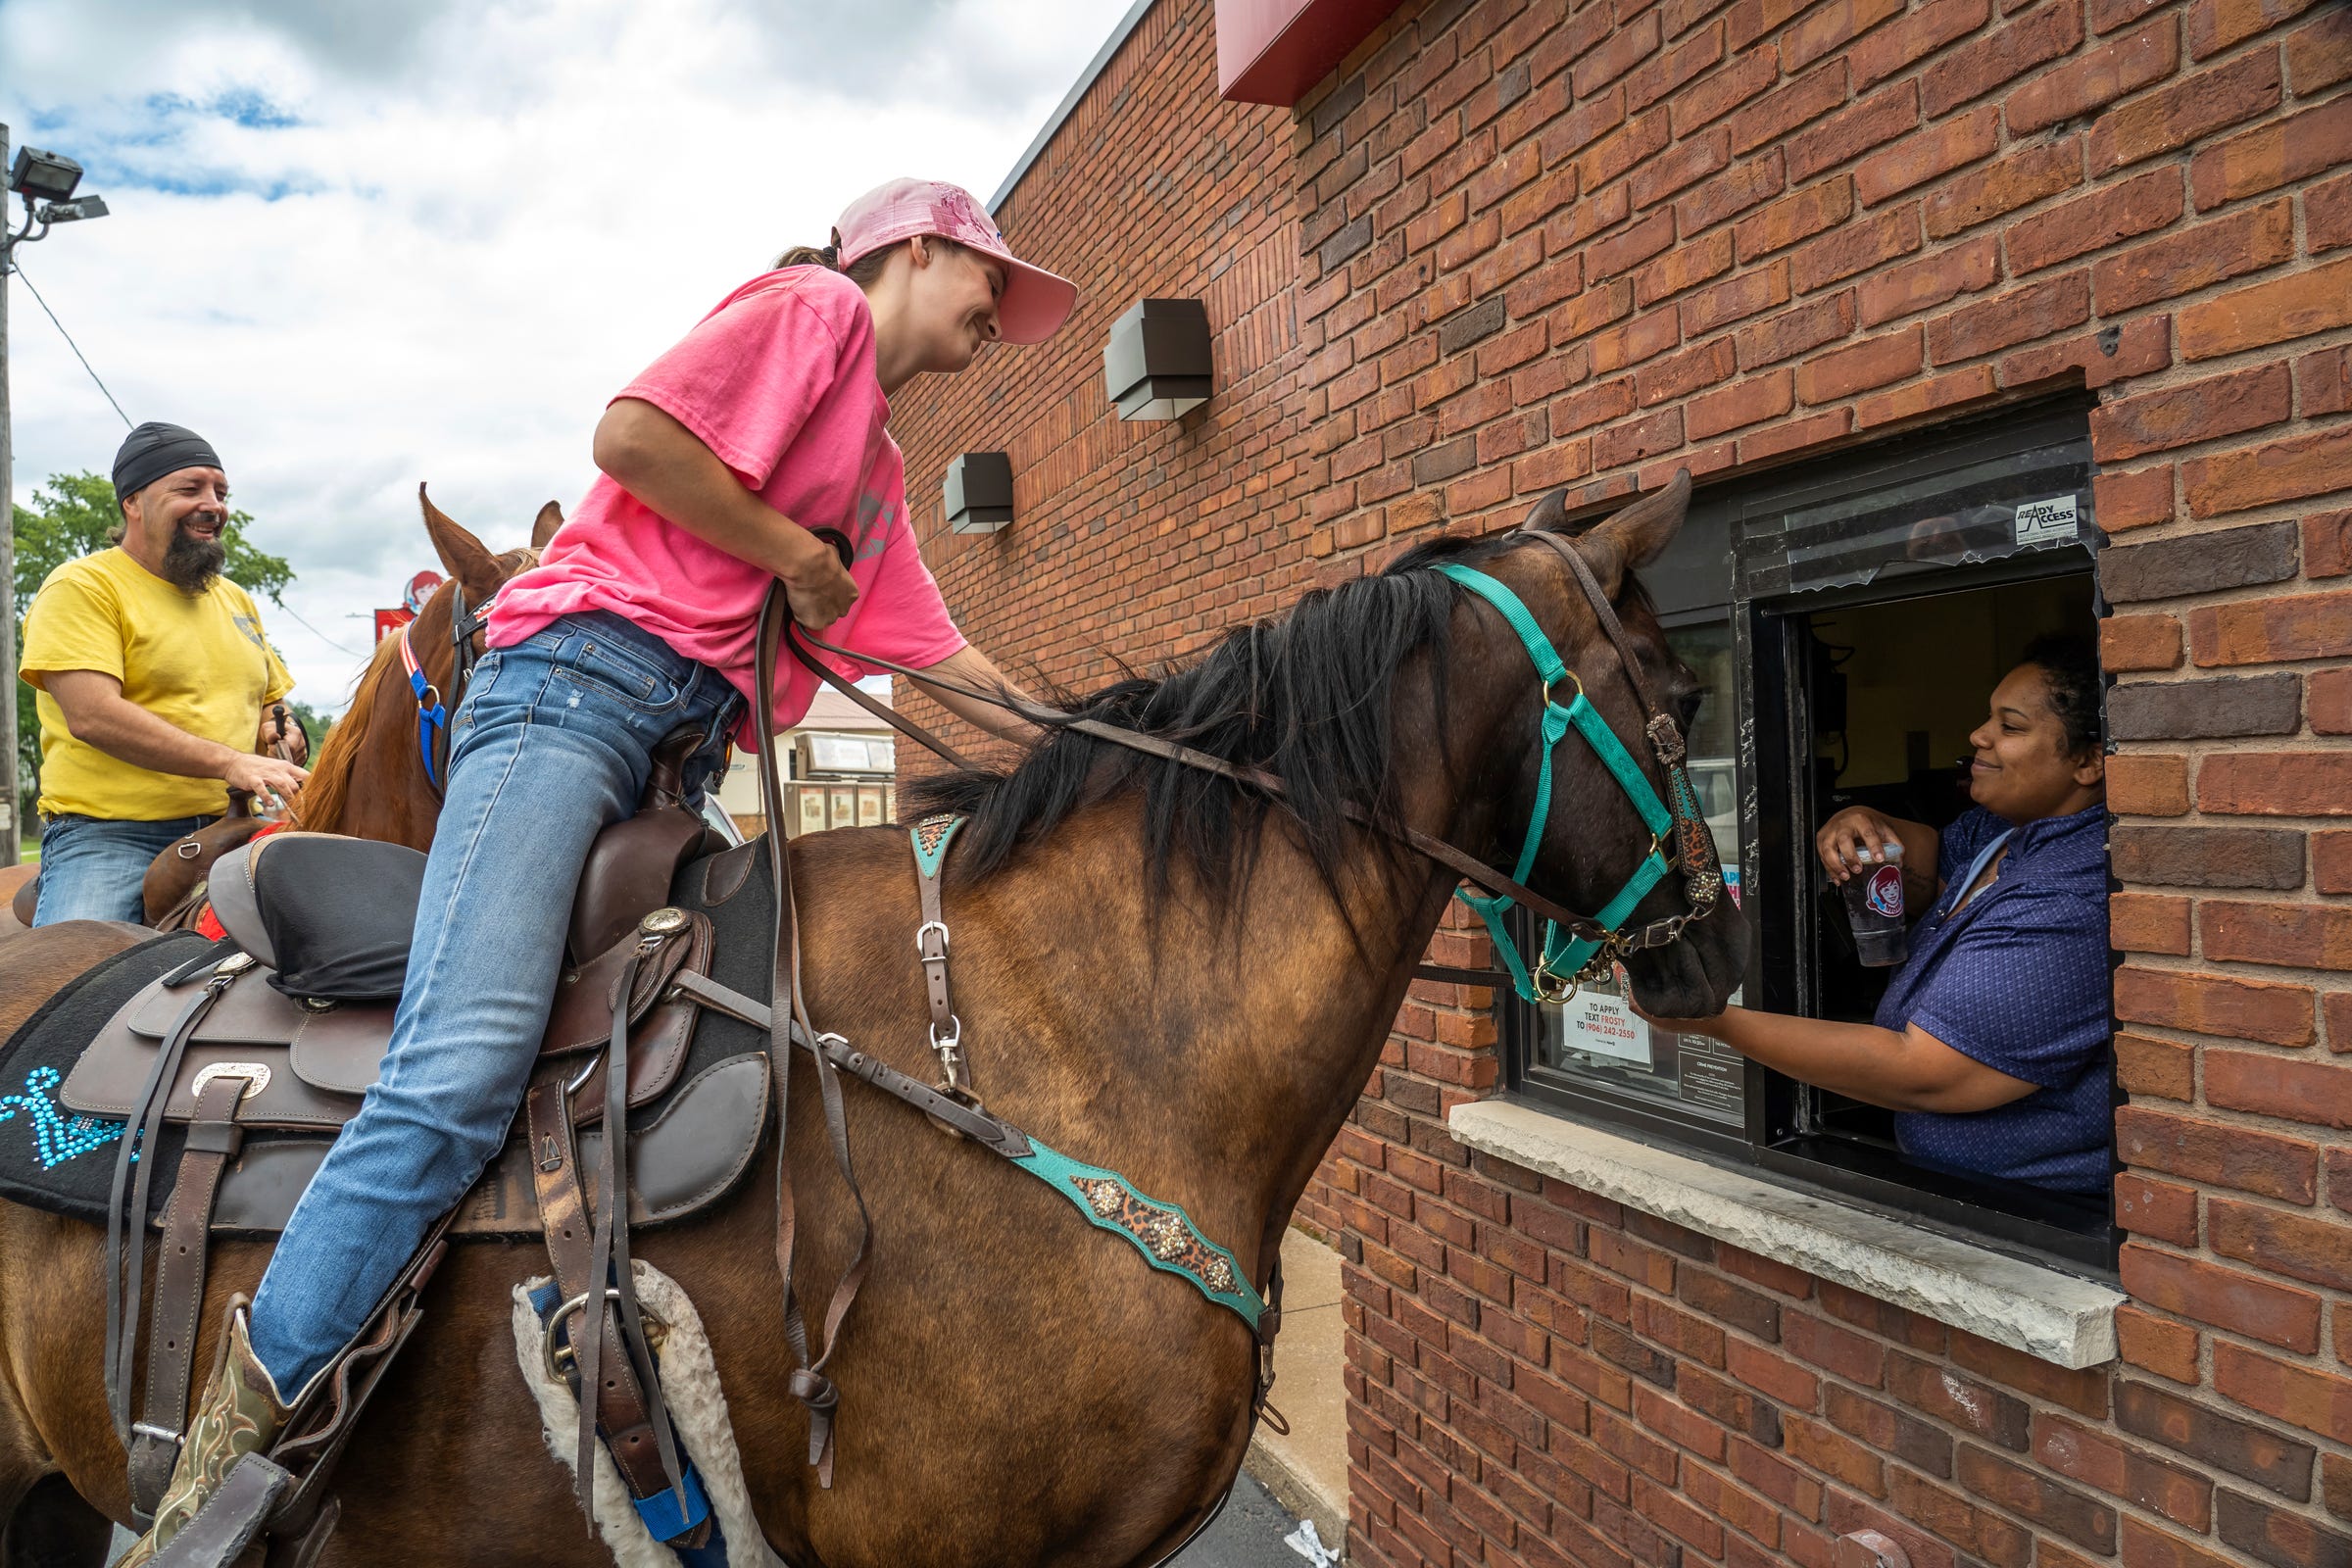 Steven Pringle, owner of Build a Bicycle - Bicycle Therapy, and his girlfriend Lindsey Gagne, of Kingsford go through a fast food drive-thru with their horses Andy and Tucker in downtown Iron Mountain on Friday, July 29, 2022, in Michigan's Upper Peninsula.